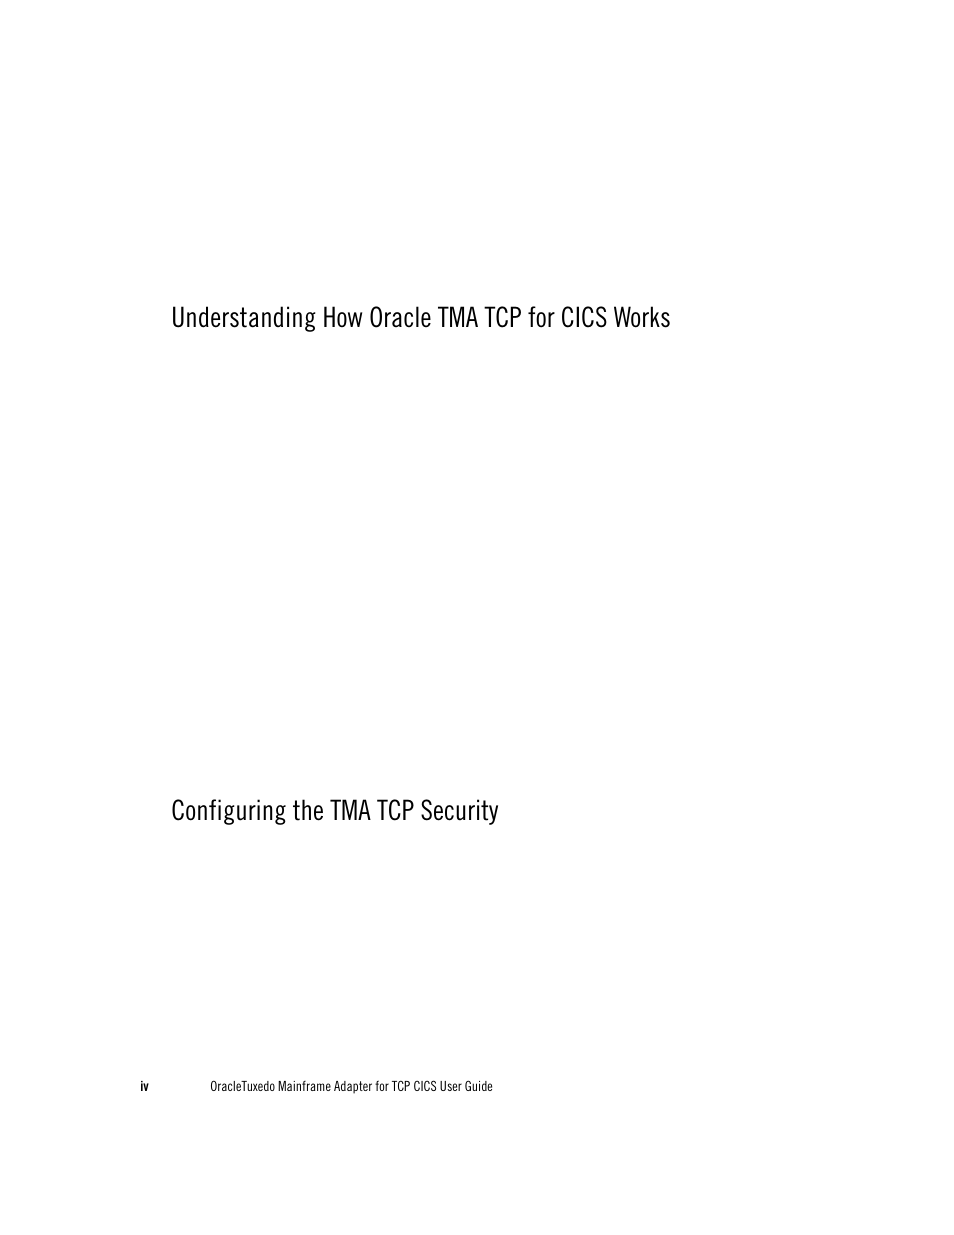 Understanding how oracle tma tcp for cics works, Configuring the tma tcp security | Oracle Audio Technologies Oracle Tuxedo User Manual | Page 4 / 112